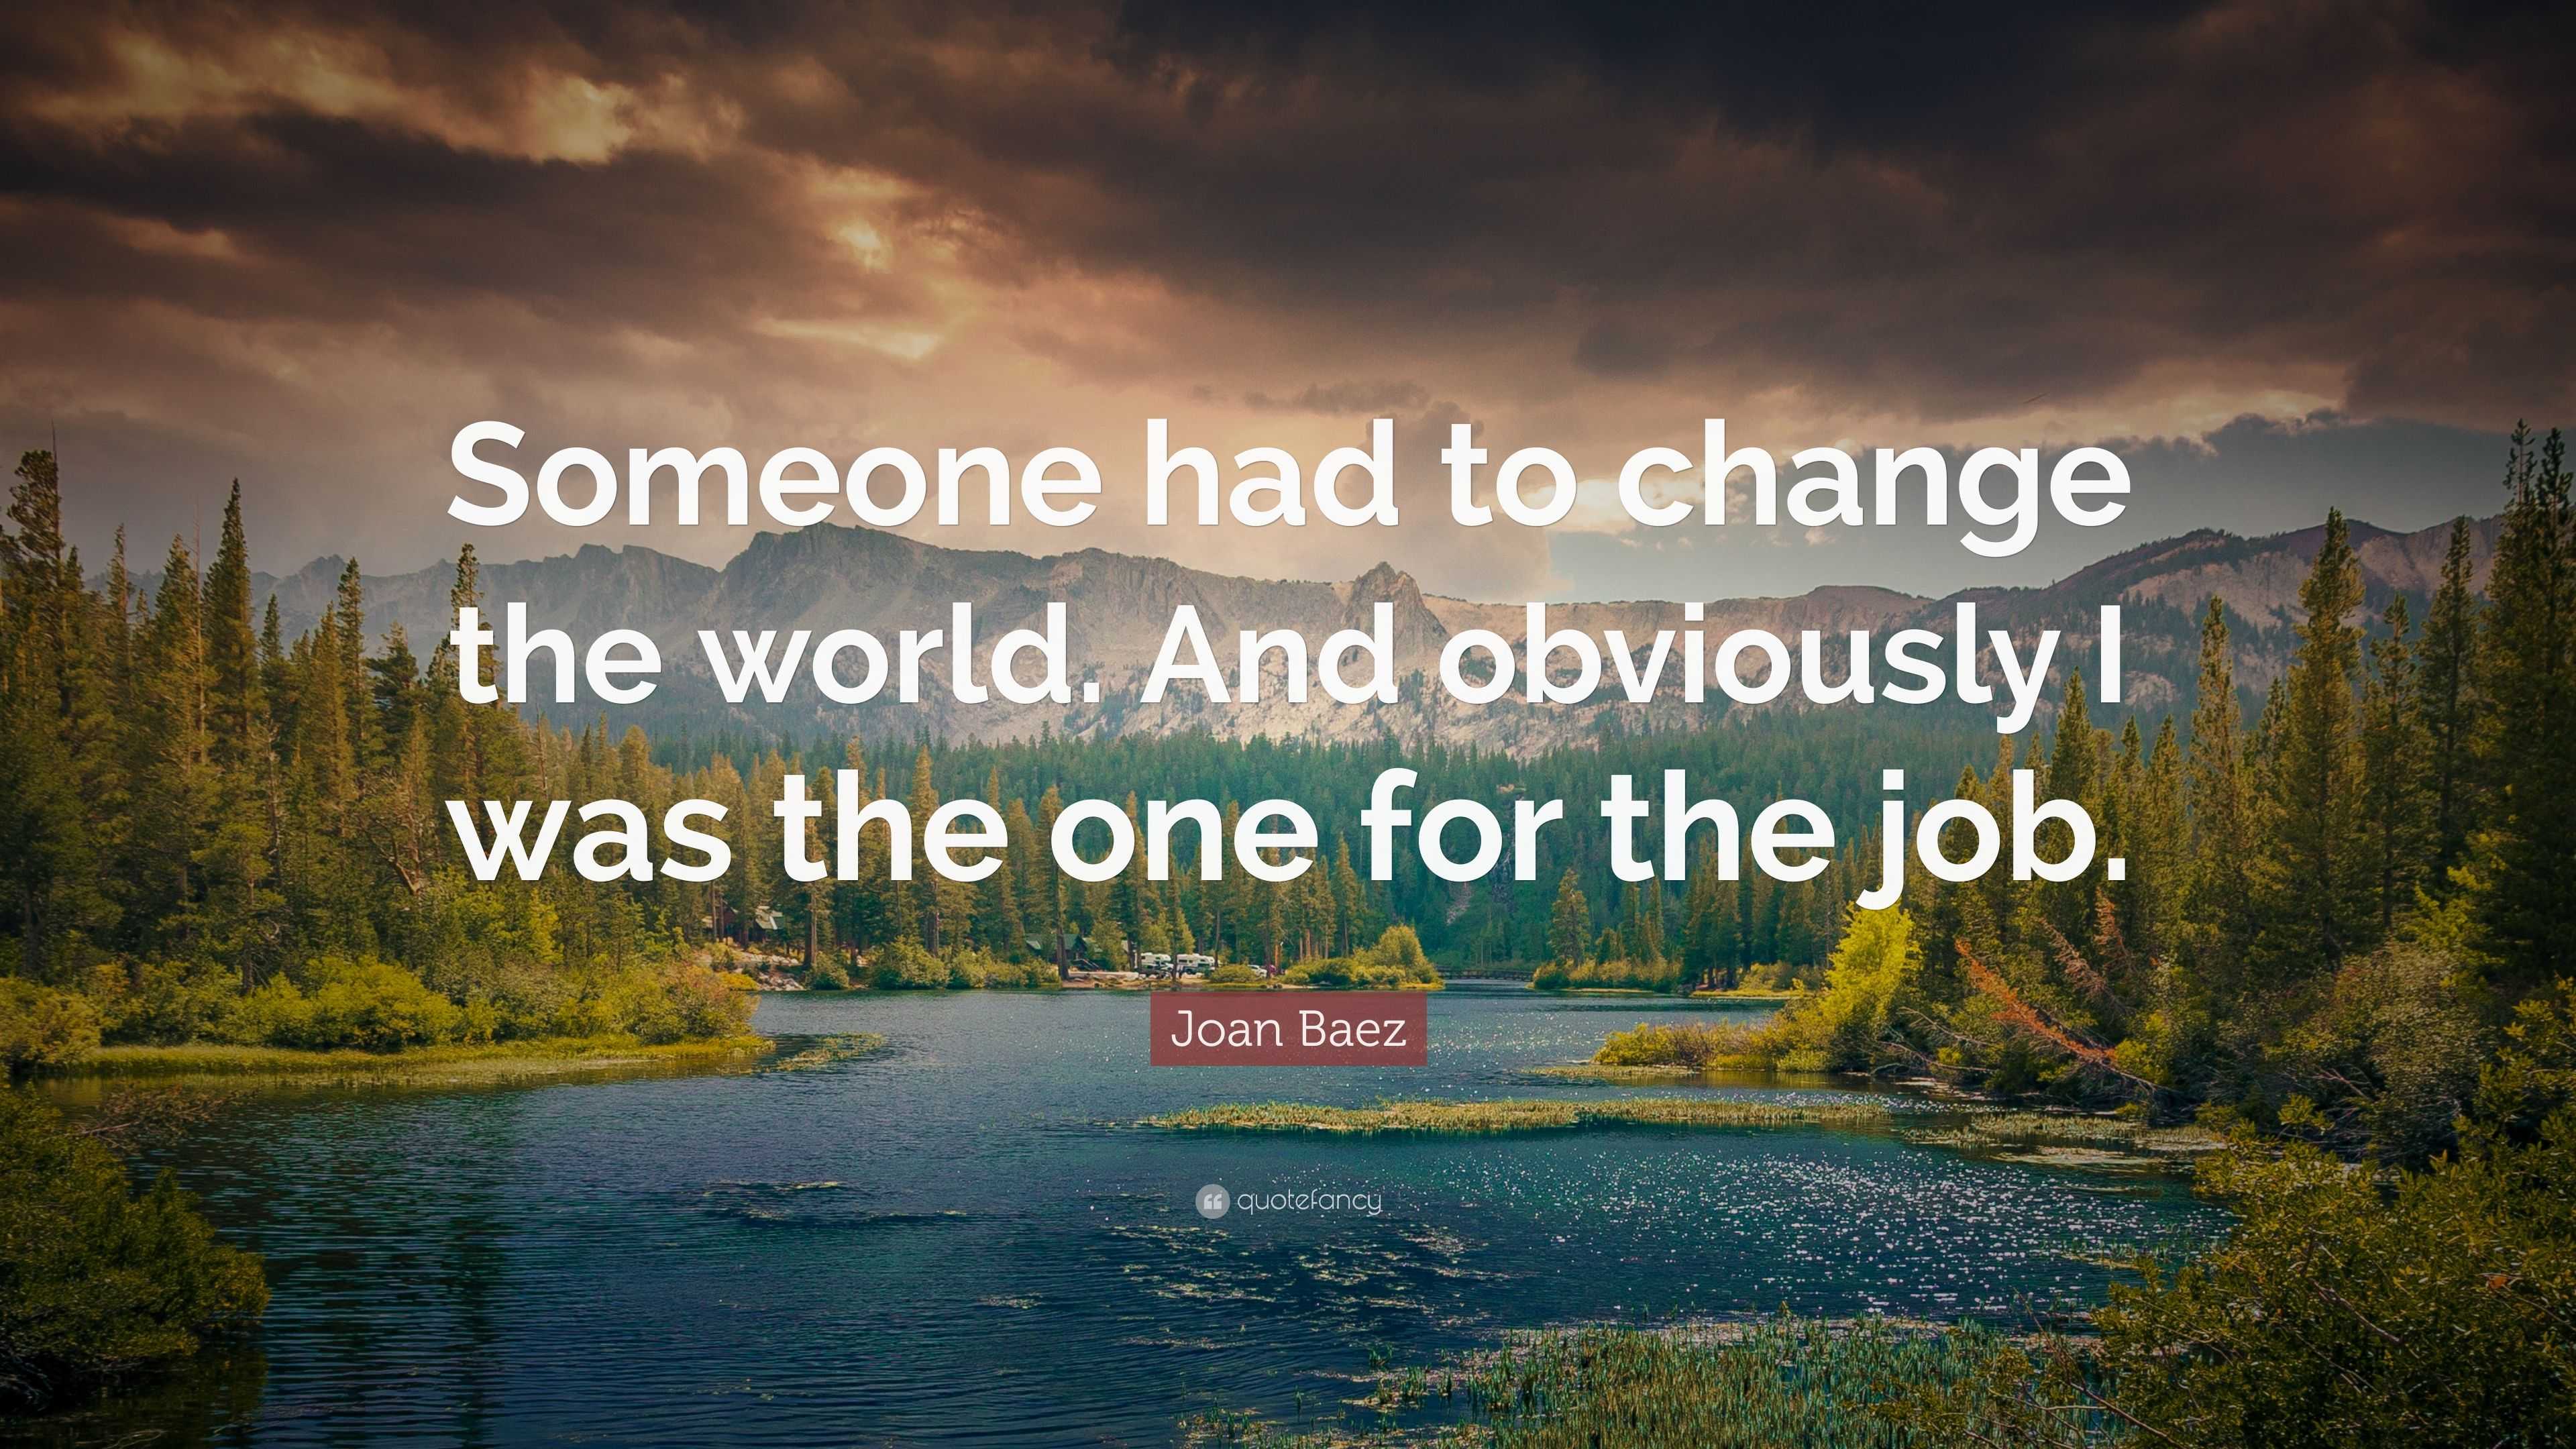 Joan Baez Quote “Someone had to change the world. And